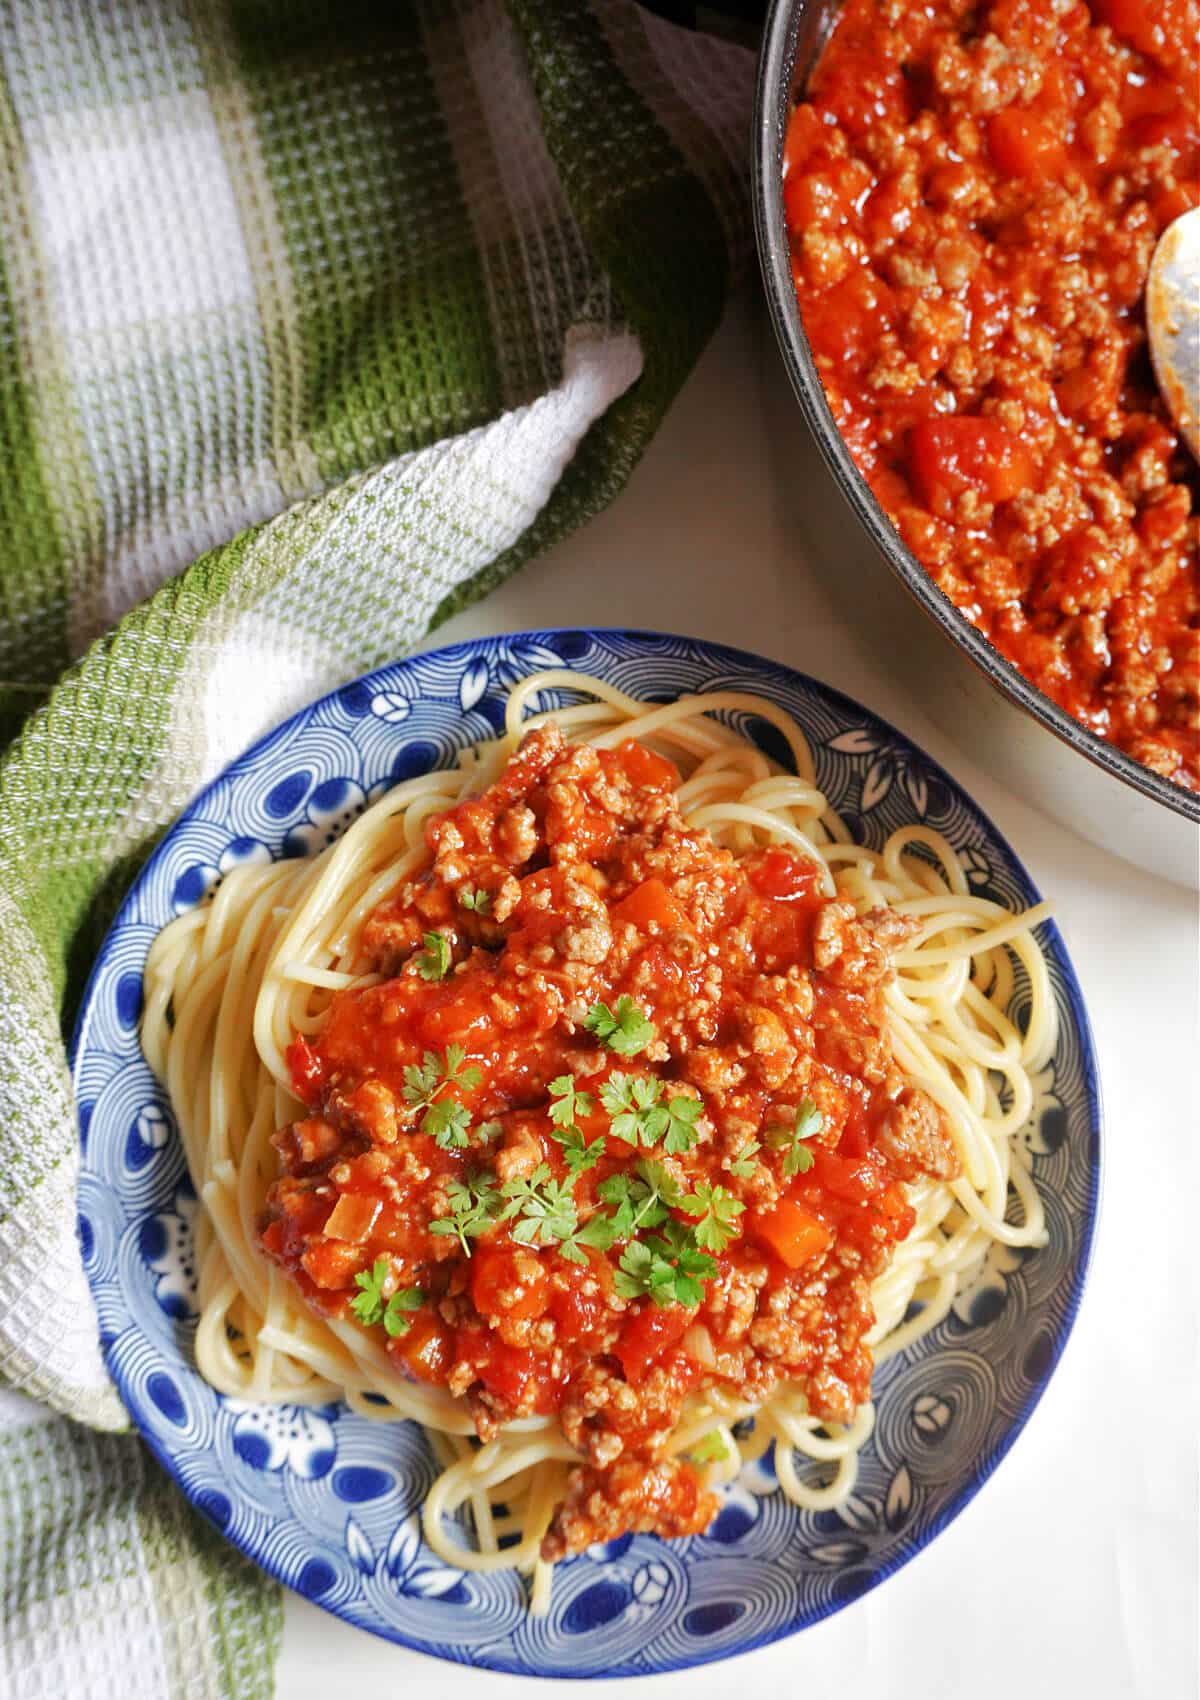 Overhead shoot of a blue plate with spaghetti and turkey bolognese, and a dish with more sauce.